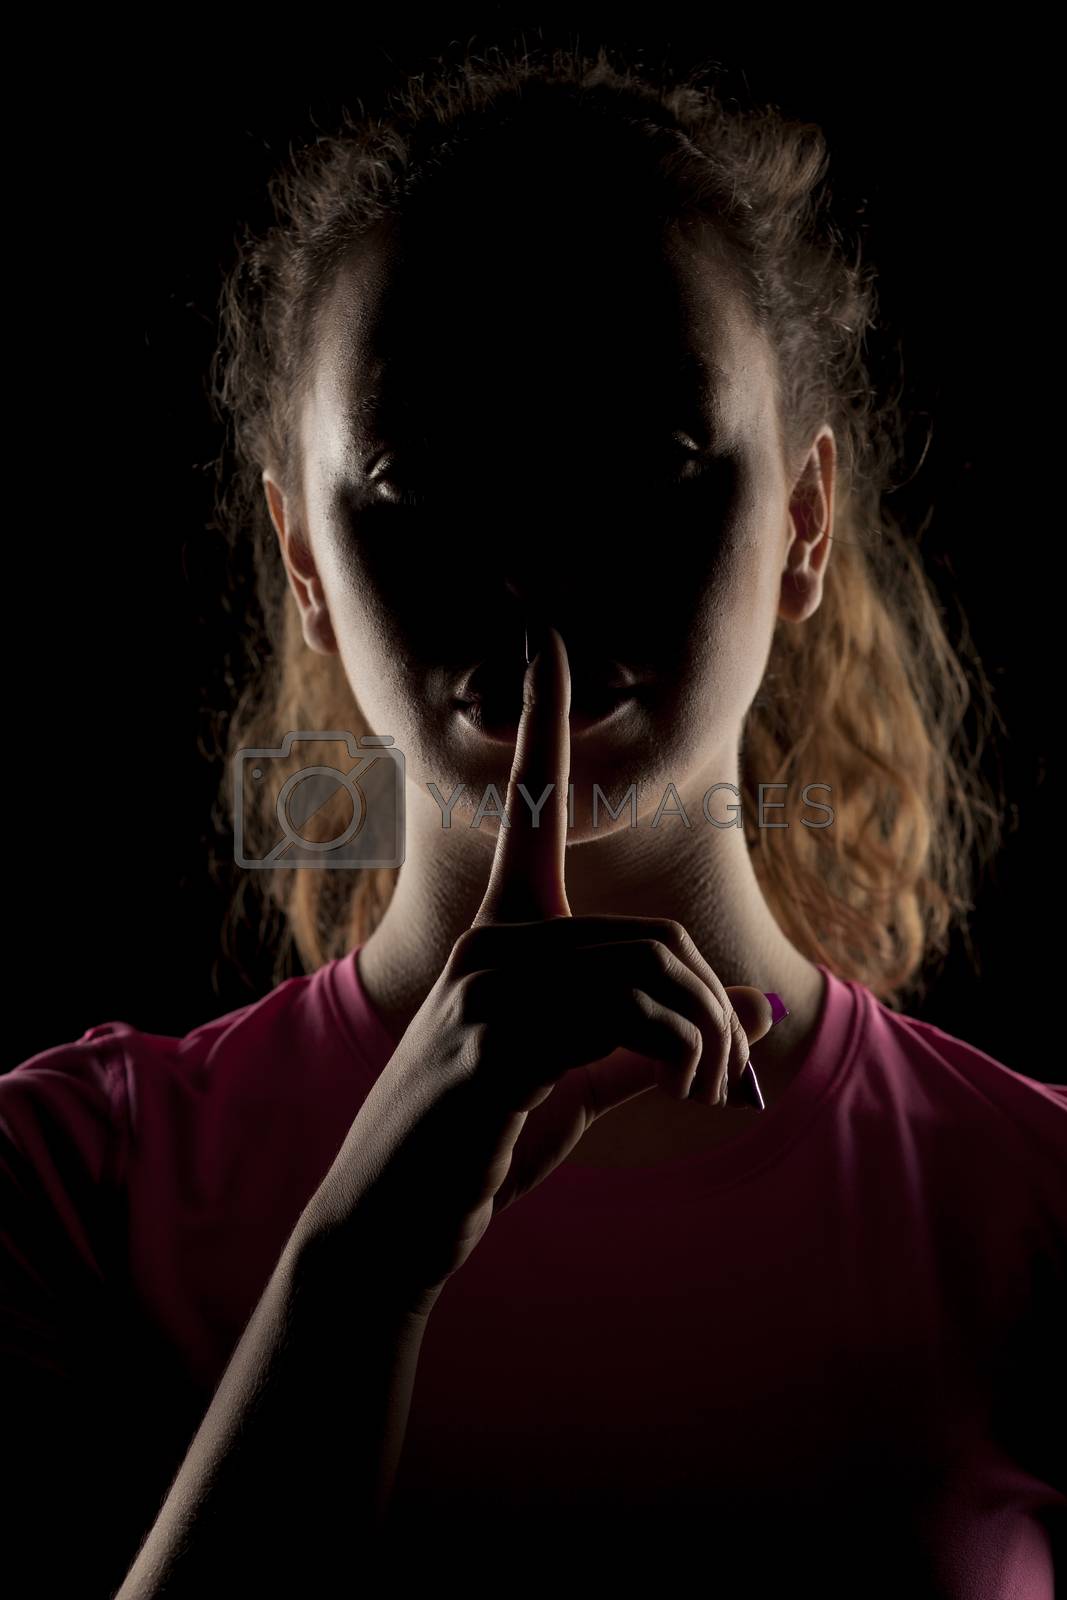 Royalty free image of woman with the face in the shadow holding finger on her lips by Vladimirfloyd